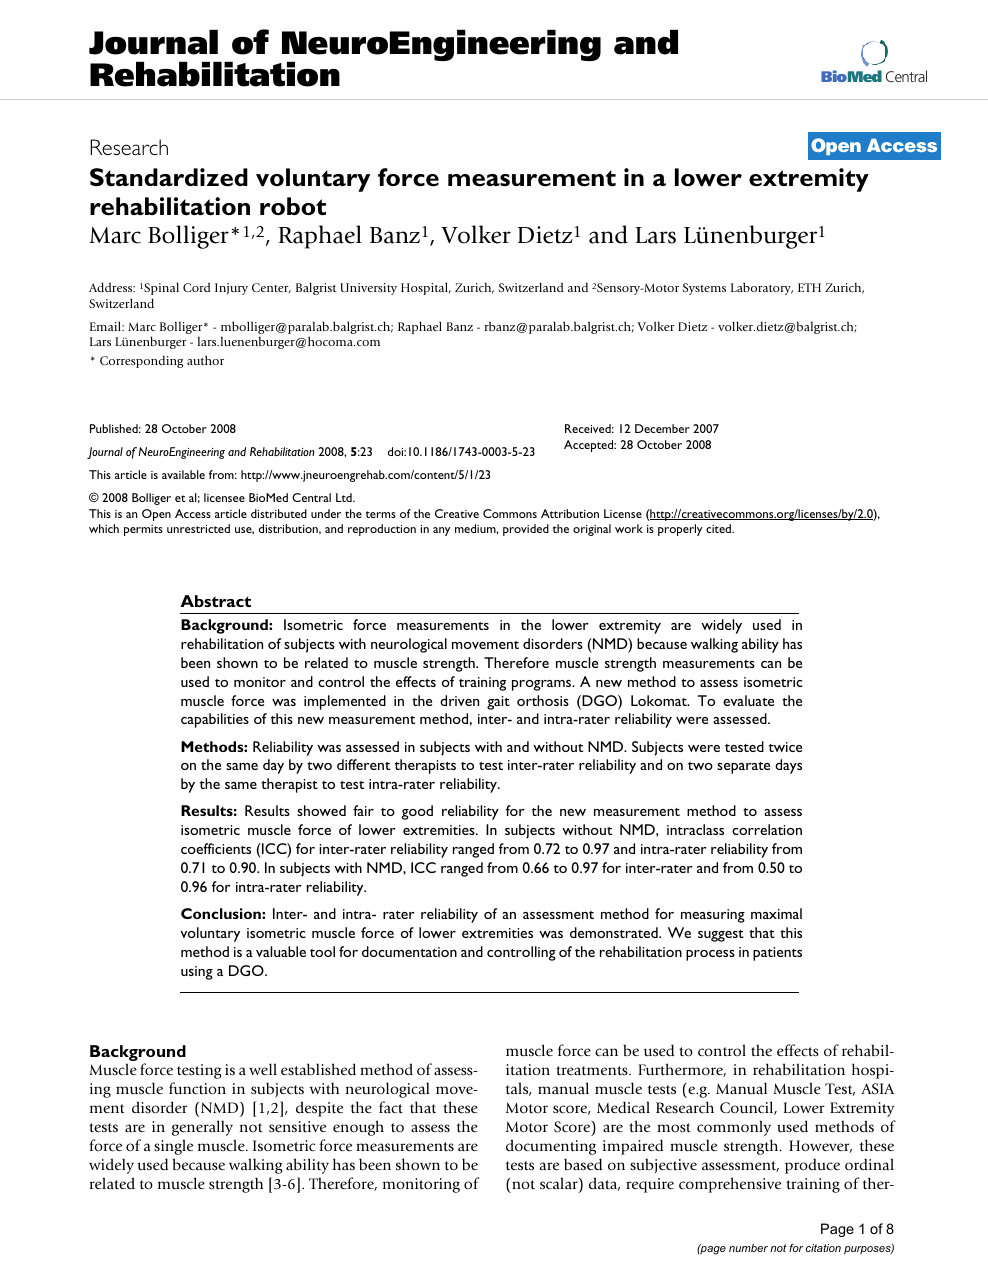 Intrarater reliability of manual muscle test (Medical Research